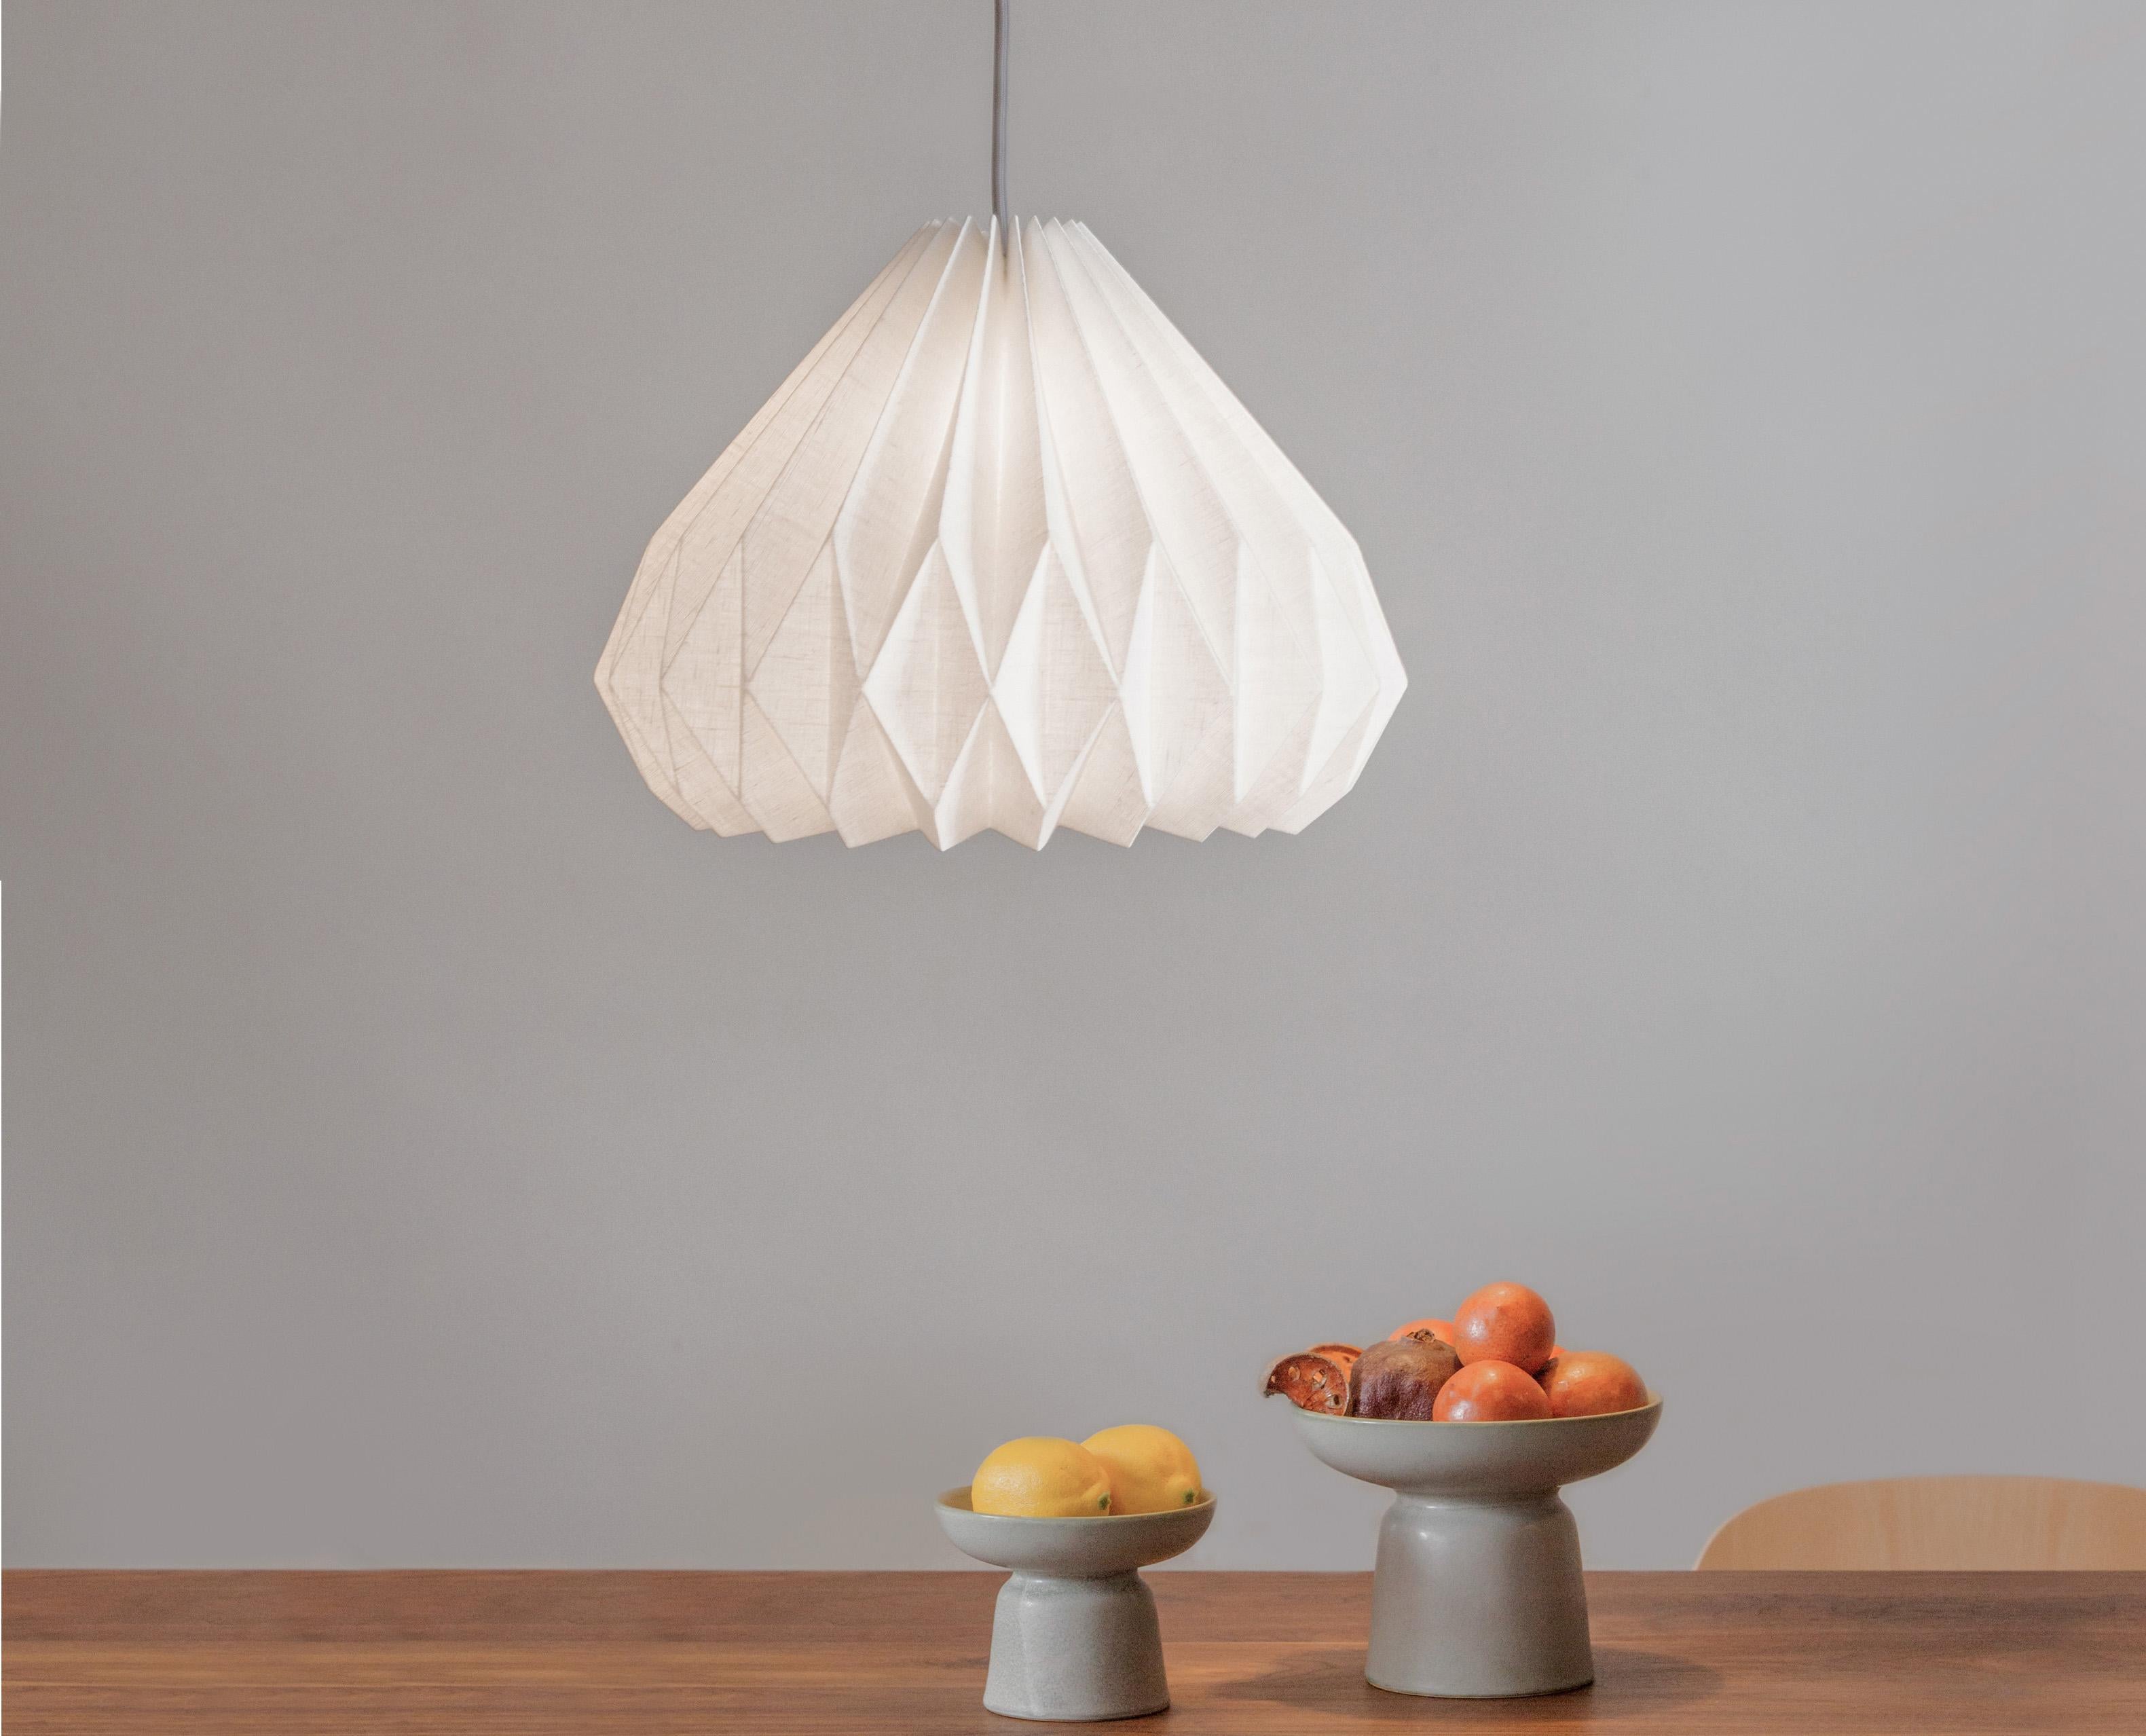 This modern-style pendant light will add an interesting and functional work of art to your interior.
Made of hand-folded laminated line fabric, the pendant shade provides soft ambient lighting while maintaining a delicate and refined aesthetic with